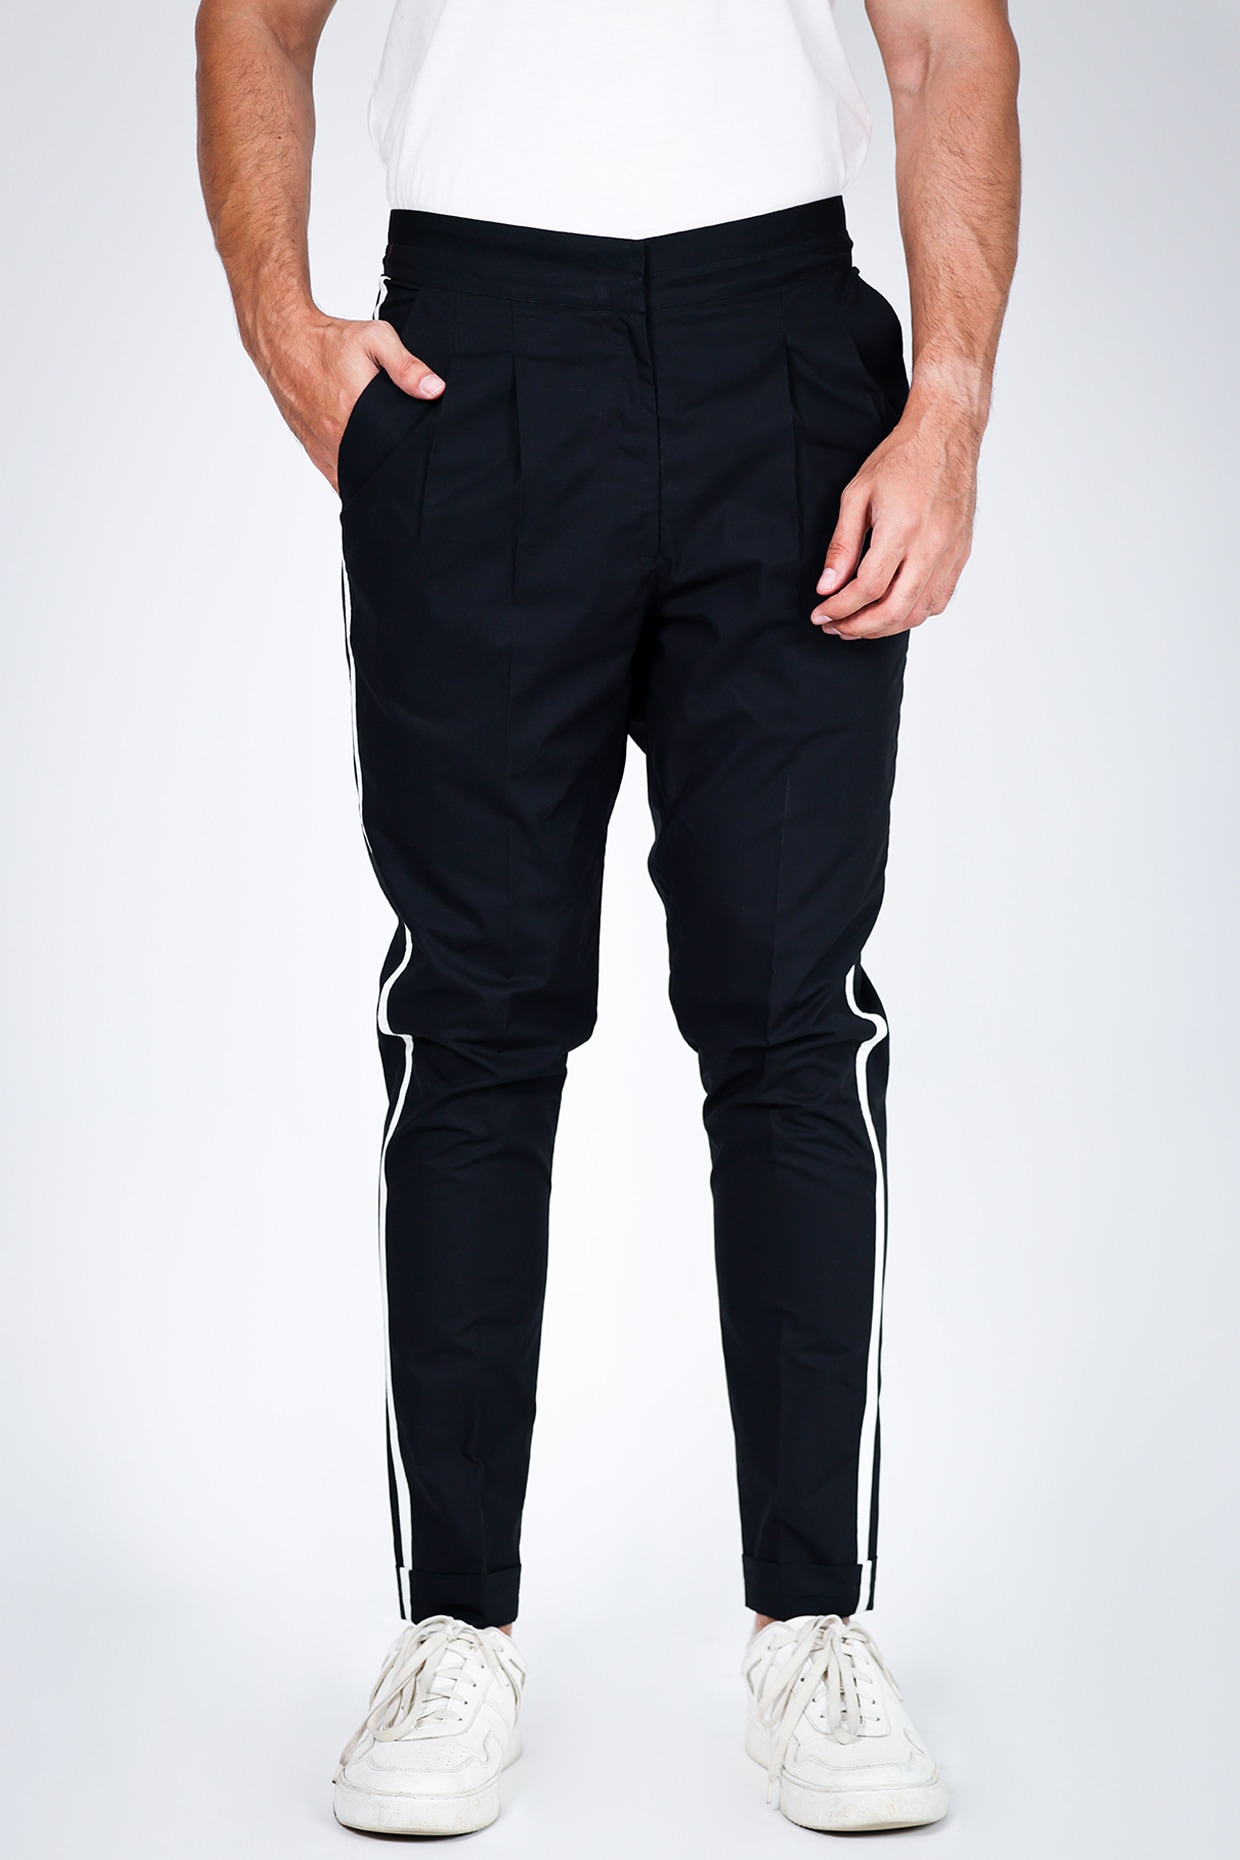 Yproject PopUp Pilot Trousers  Black  Garmentory